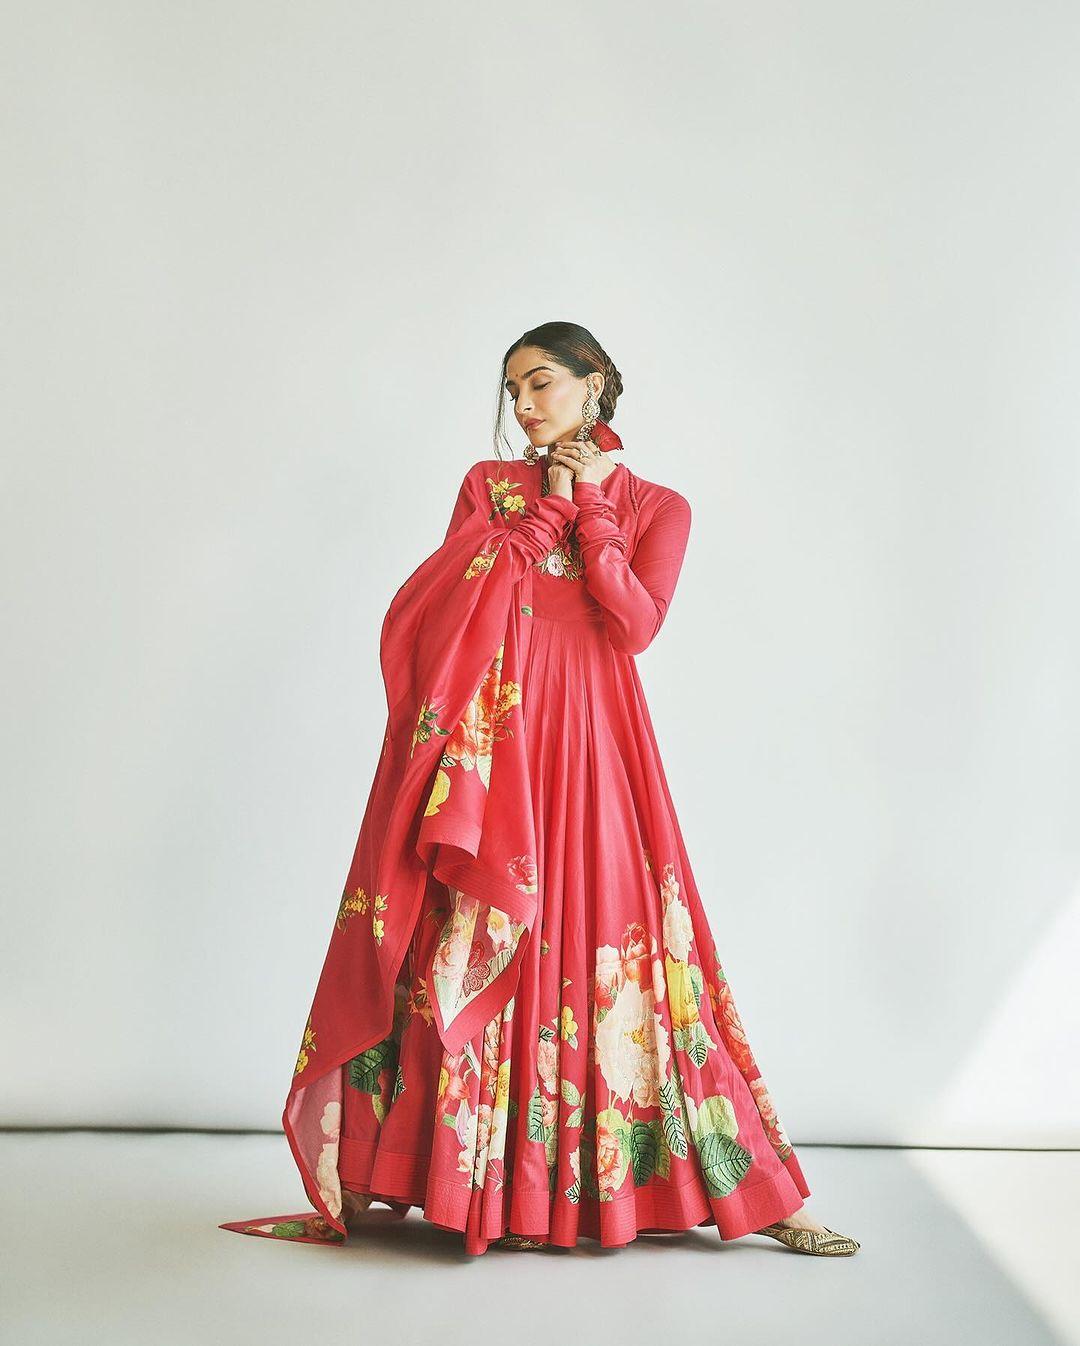 Sonam Kapoor is a diva, and there is no second thought about it. Taking outfit inspiration from her will bring you all compliments. Although choosing the best outfit from Sonam's collection was a task, here is a red, simple yet glamorous outfit for you that will make you look like a queen this Baisakhi